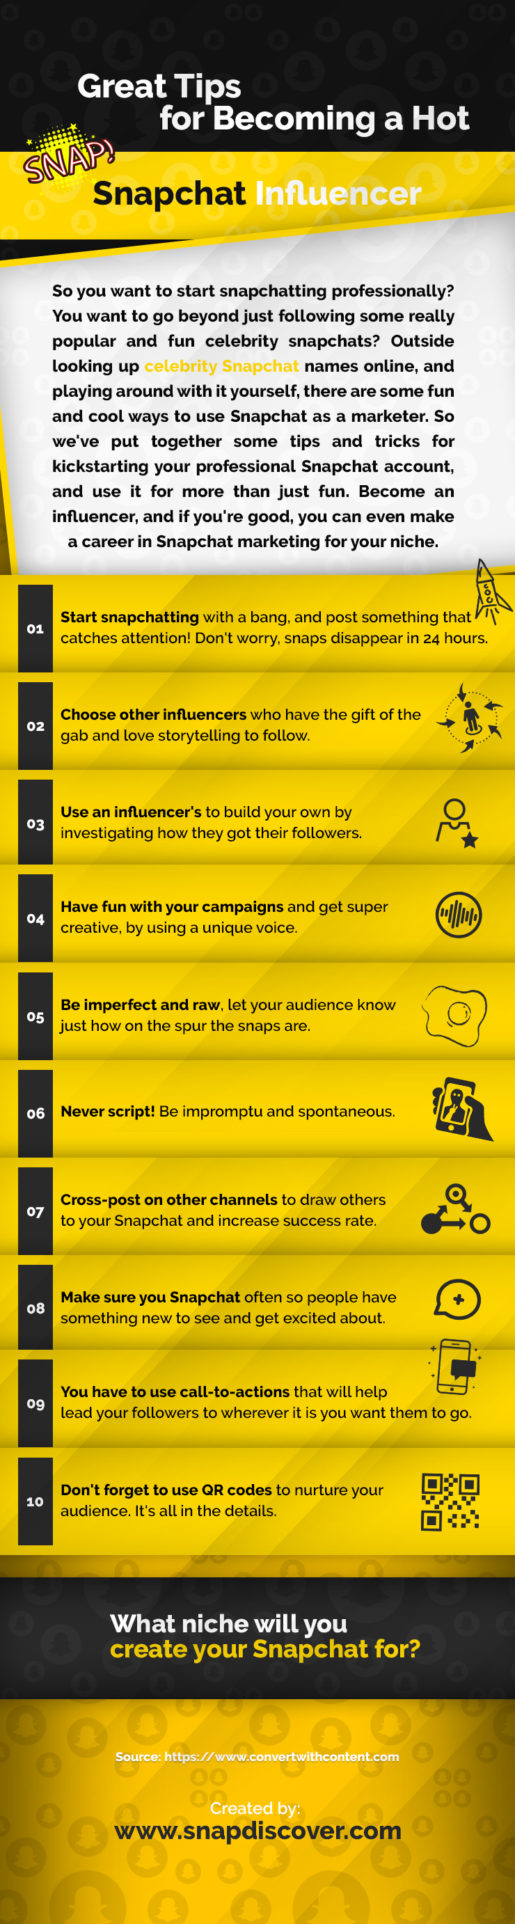 Great Tips for Becoming a Hot Snapchat Influencer